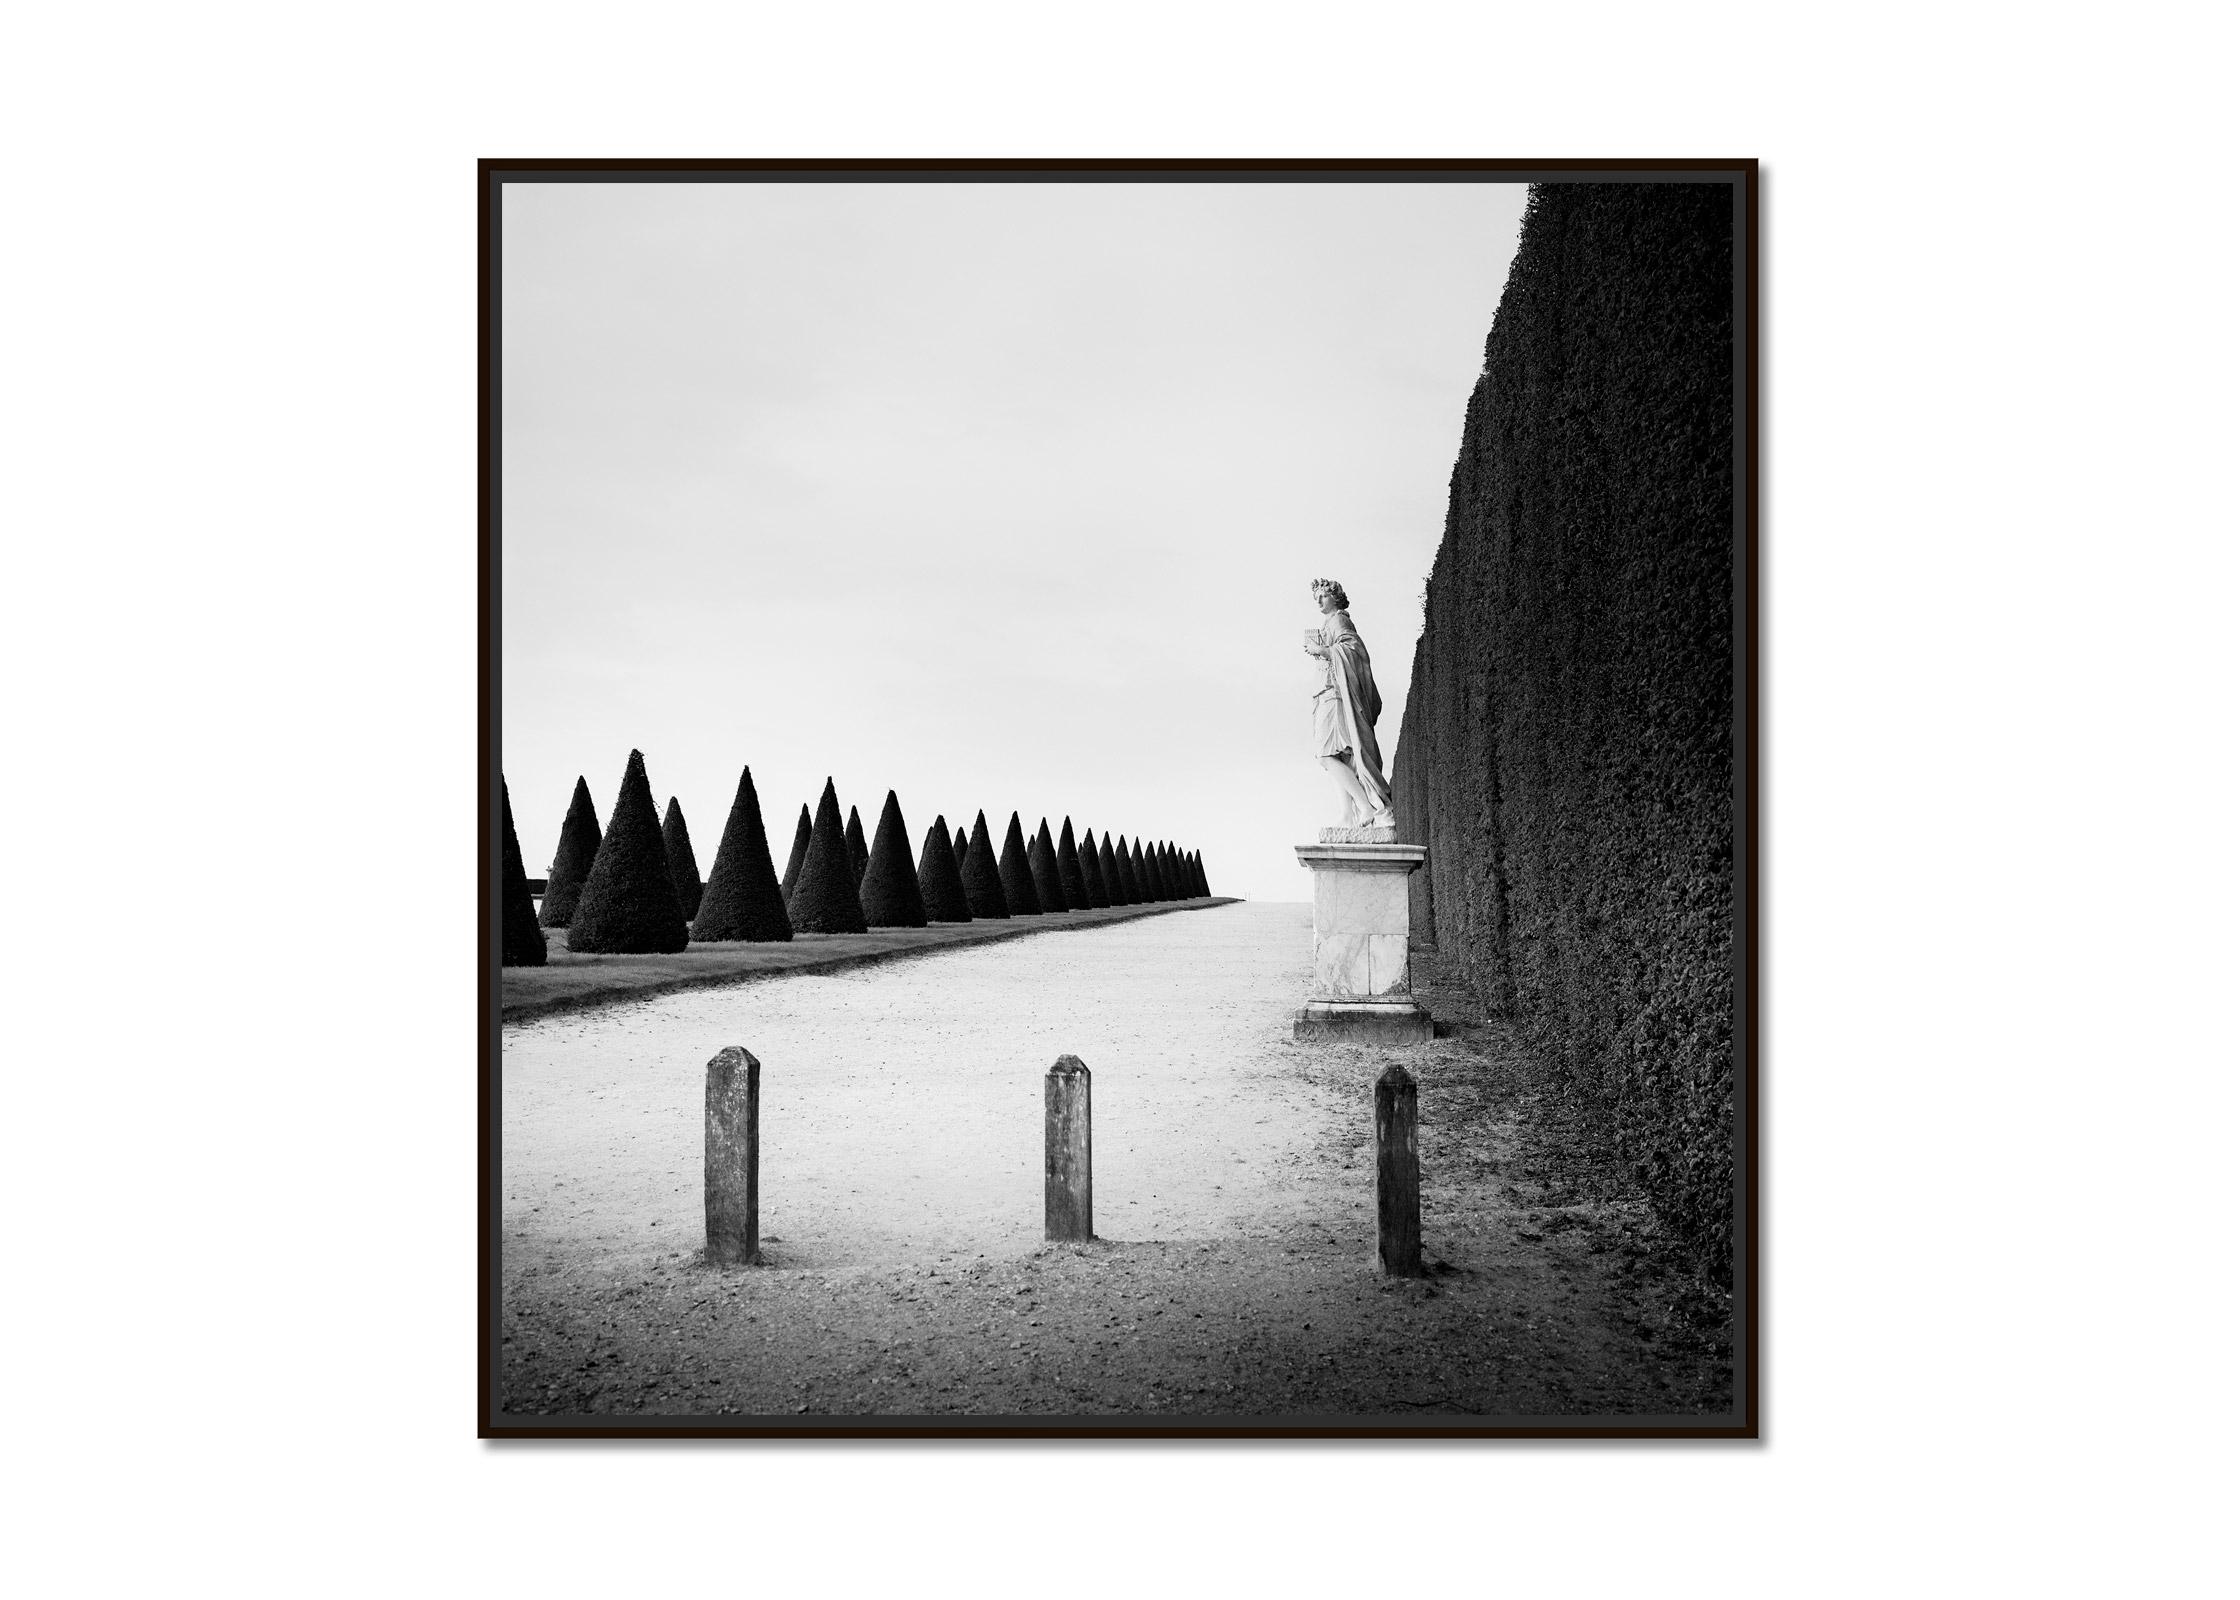 The Garden of Versailles, Paris, France, black and white landscape photography - Photograph by Gerald Berghammer